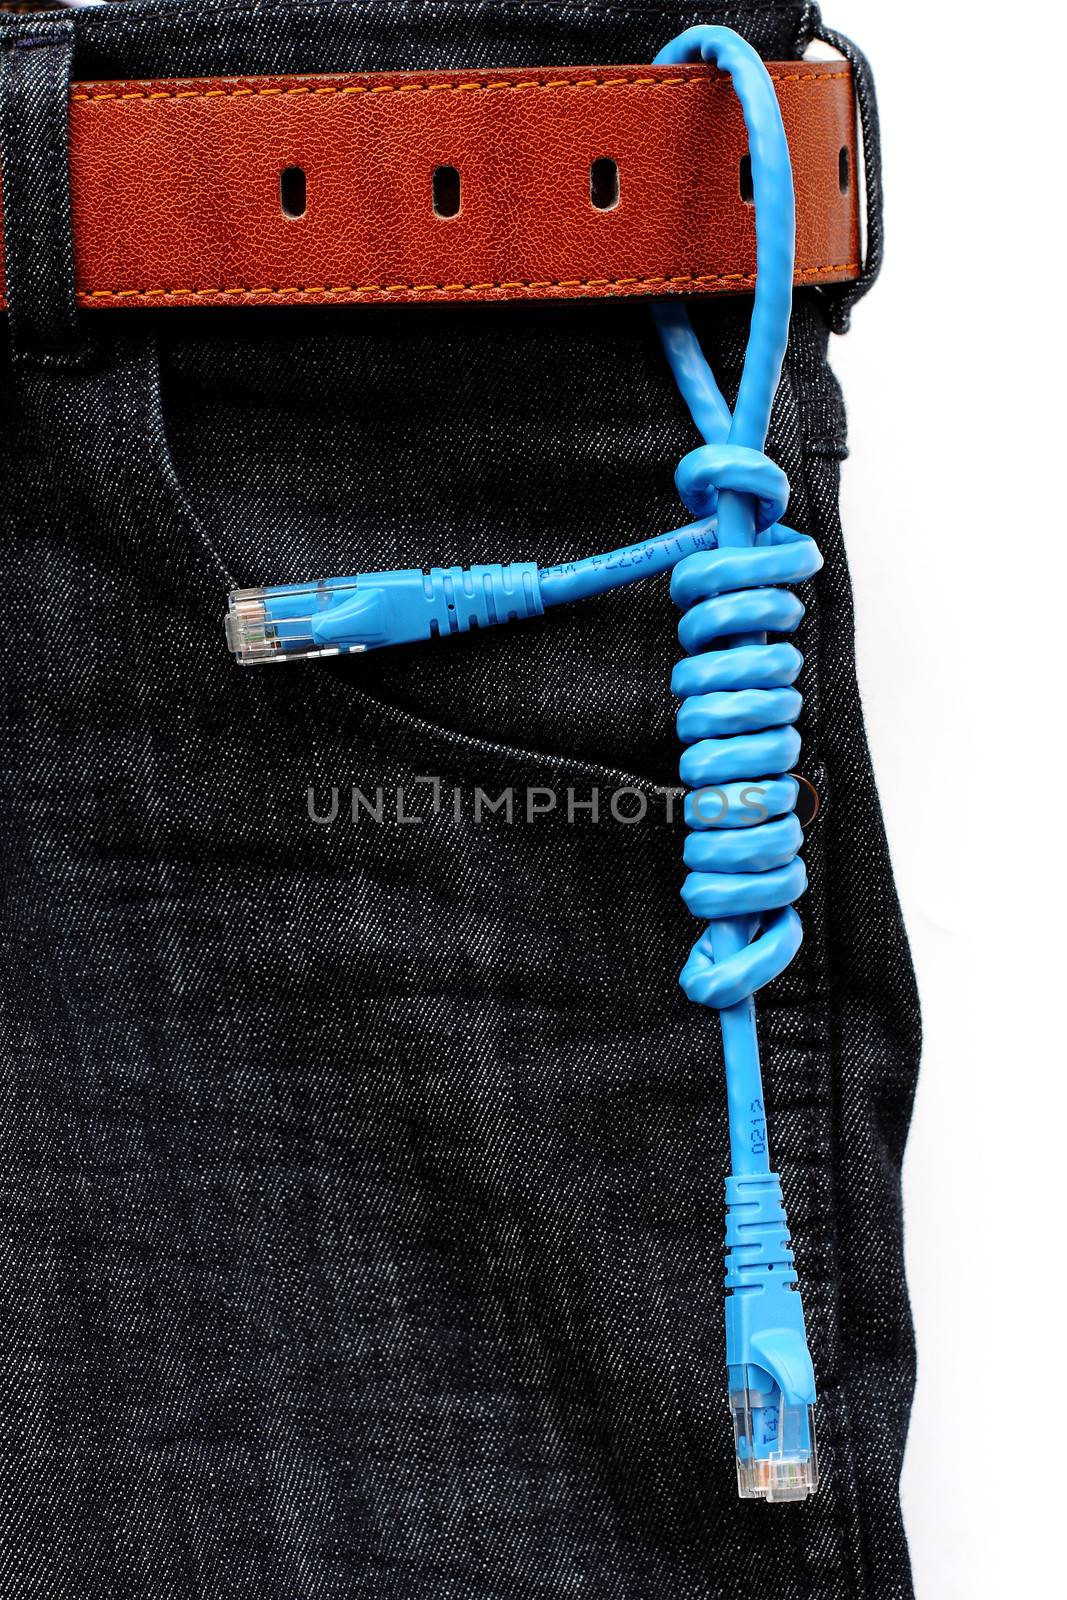 USB cable on jeans background by myrainjom01